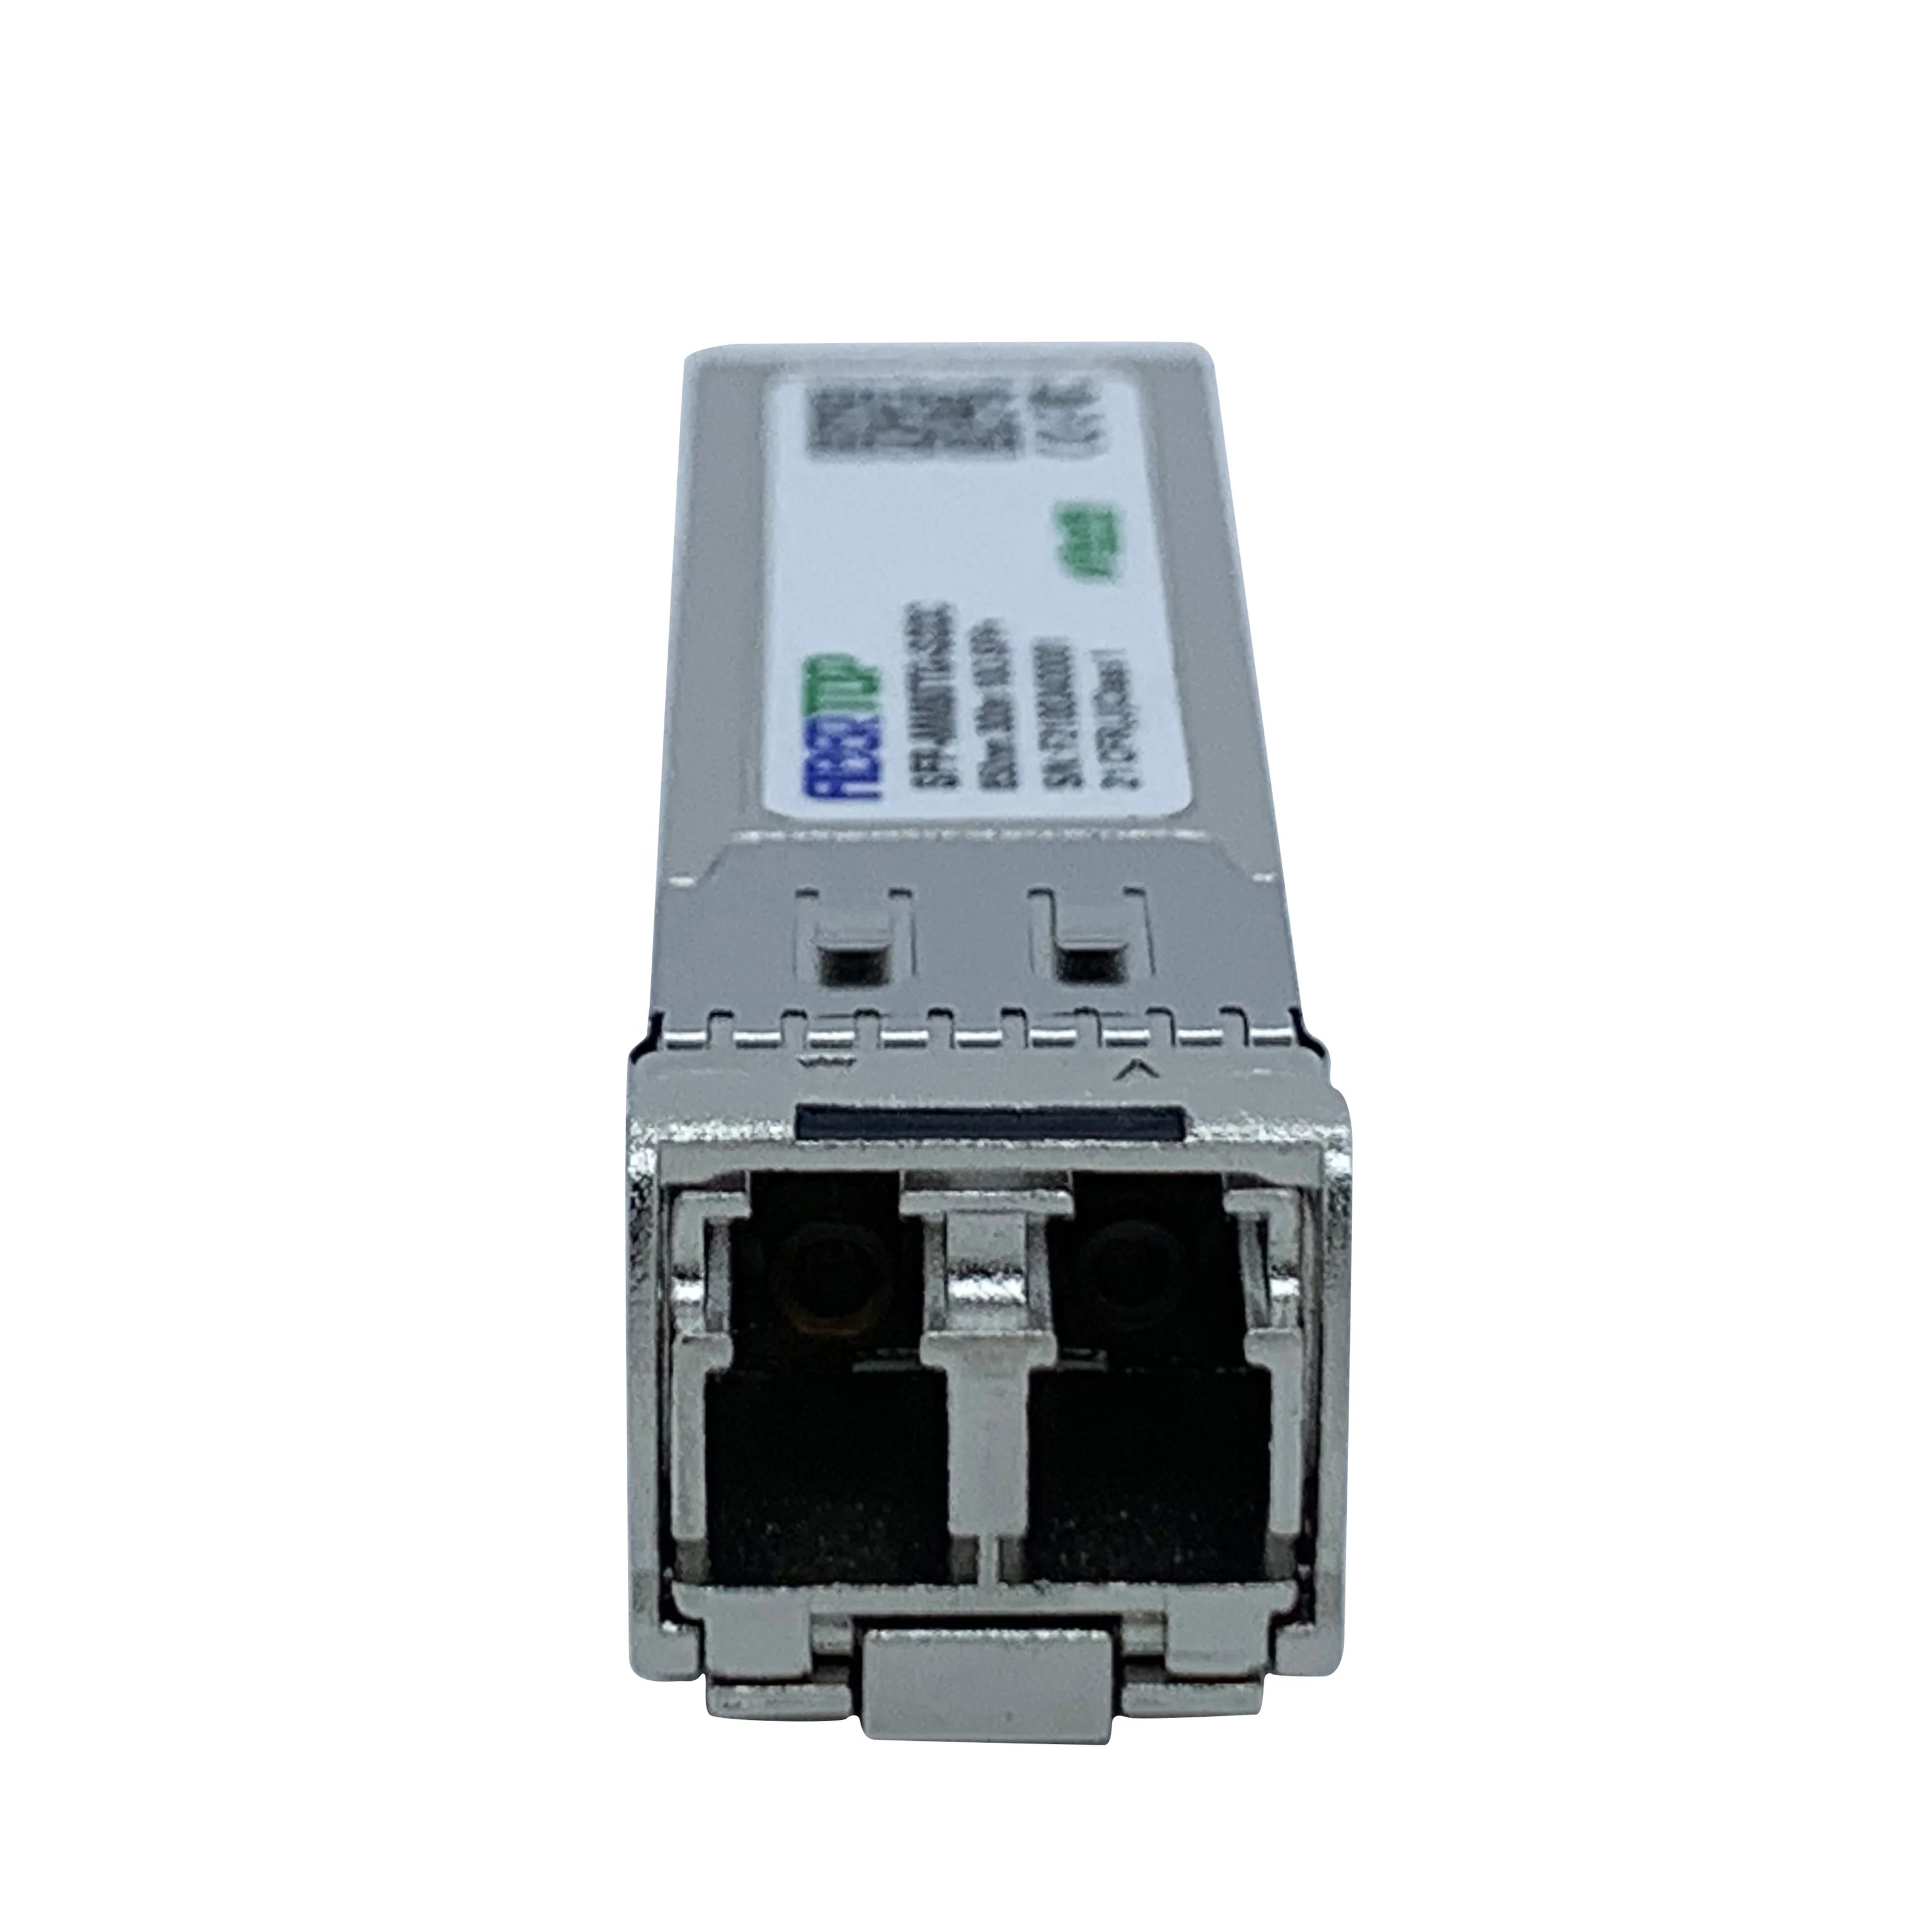 compatible with J9150A transceiver FIBERTOP 10G SFP+ 850NM reach to 300M dual lc connectors built-in TX and RX CDR